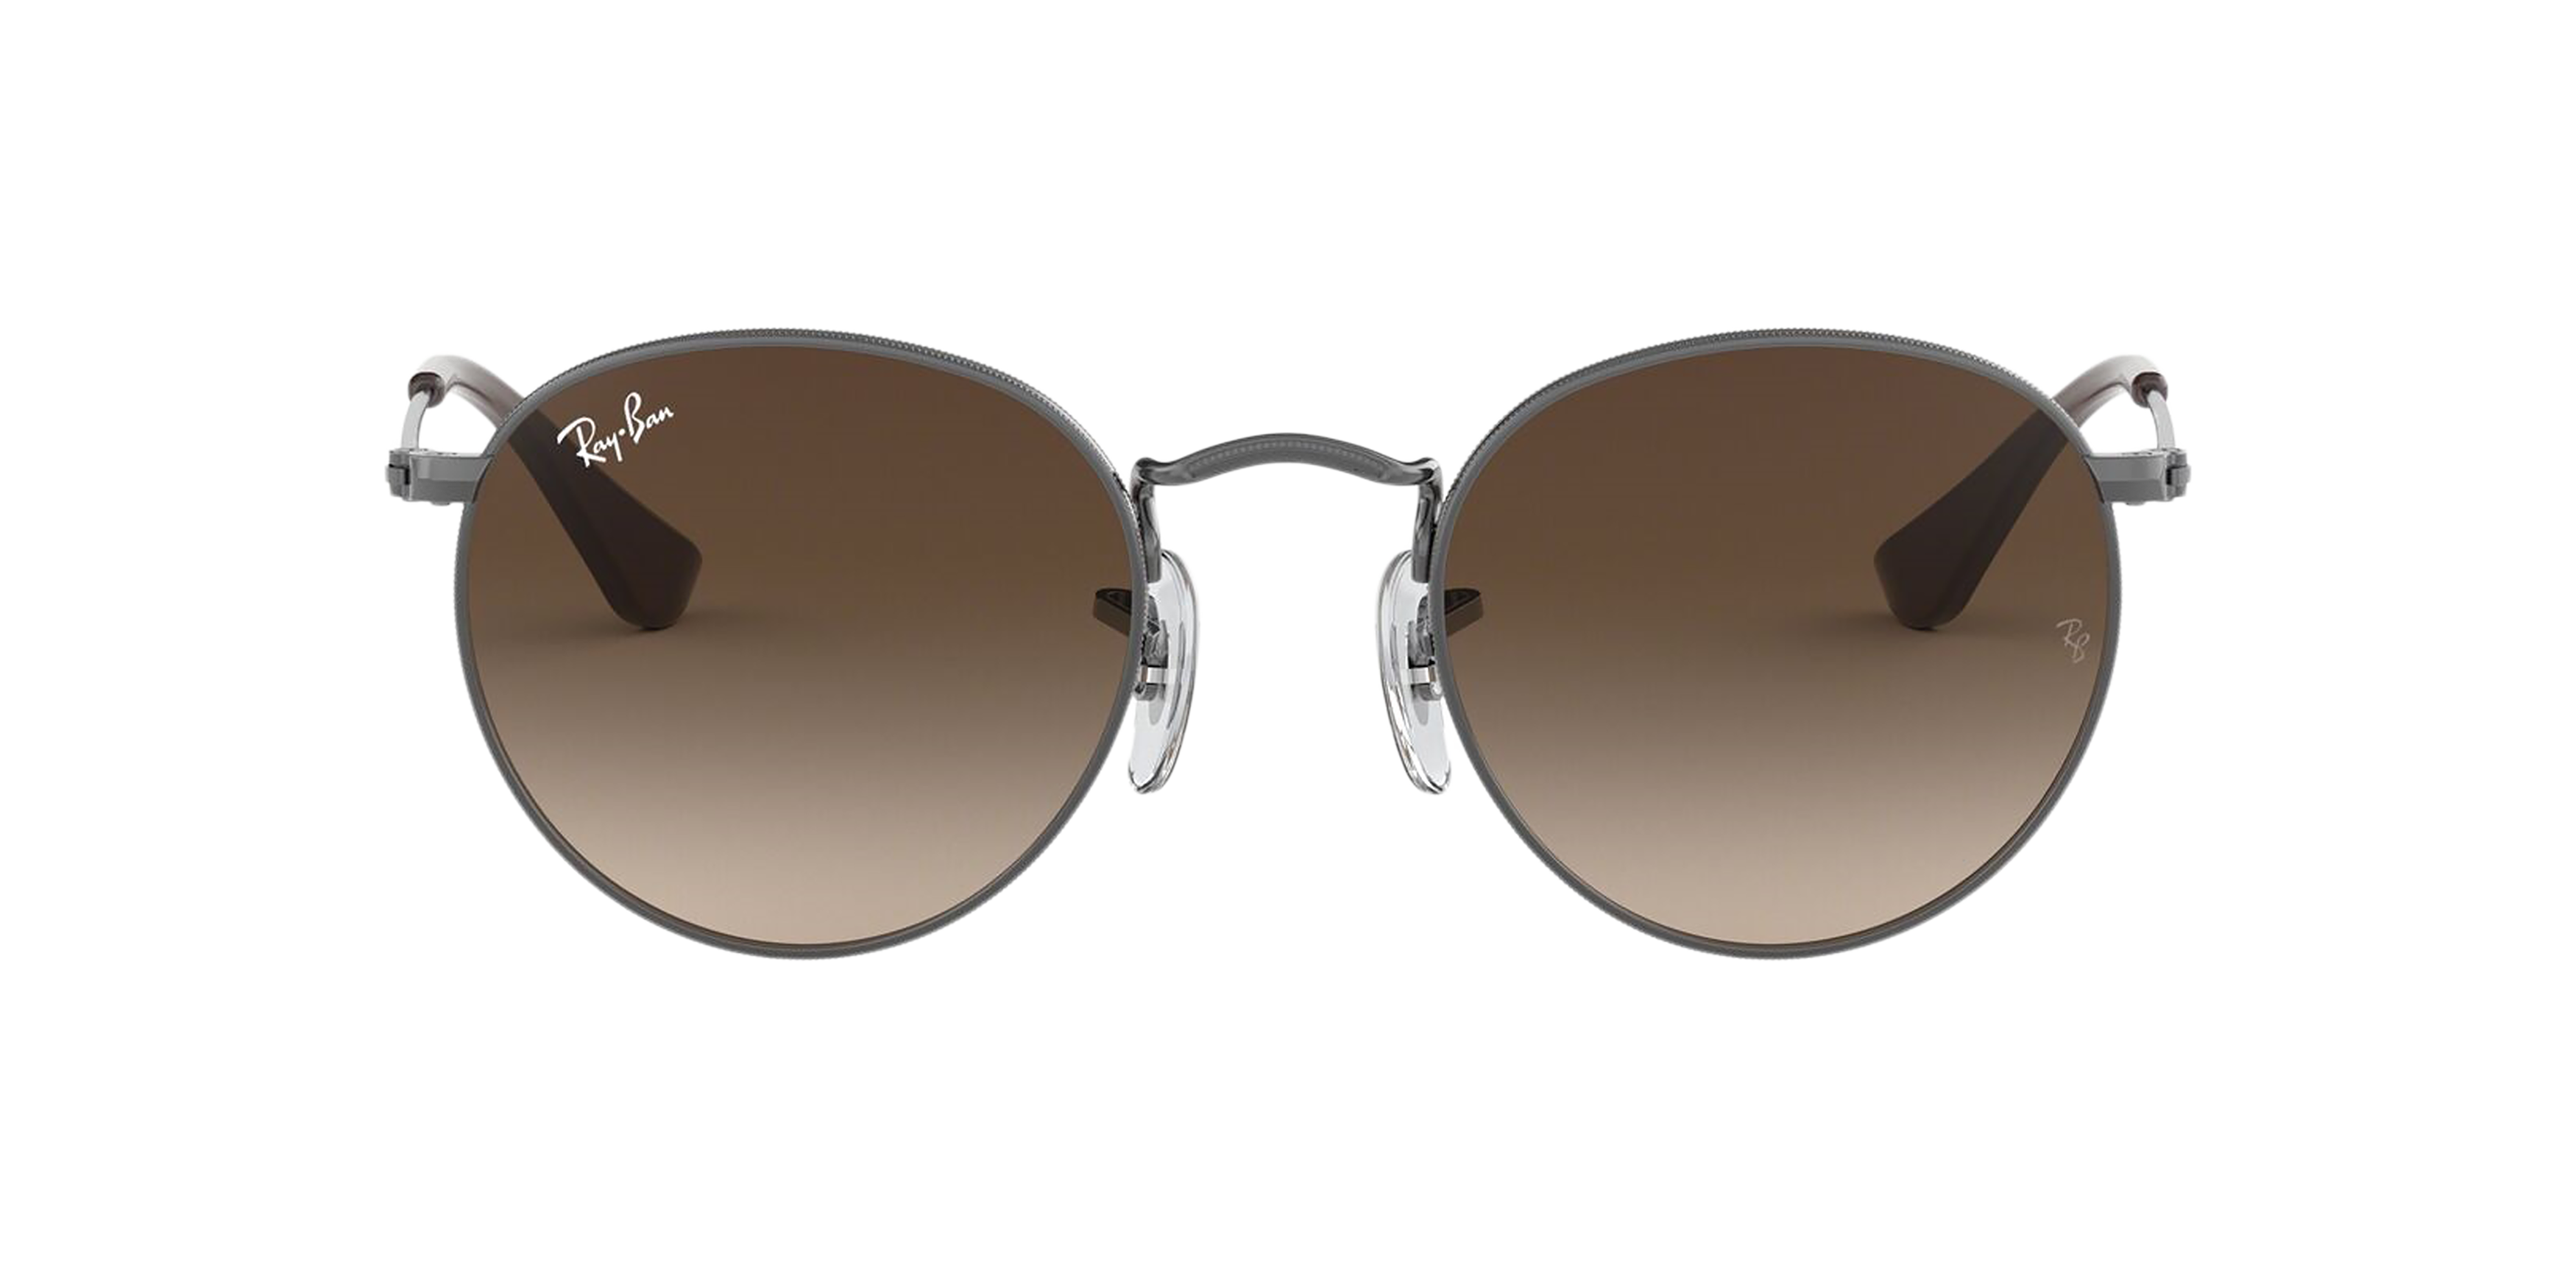 [products.image.front] Ray-Ban Junior Round Metal RJ9547S 200/13